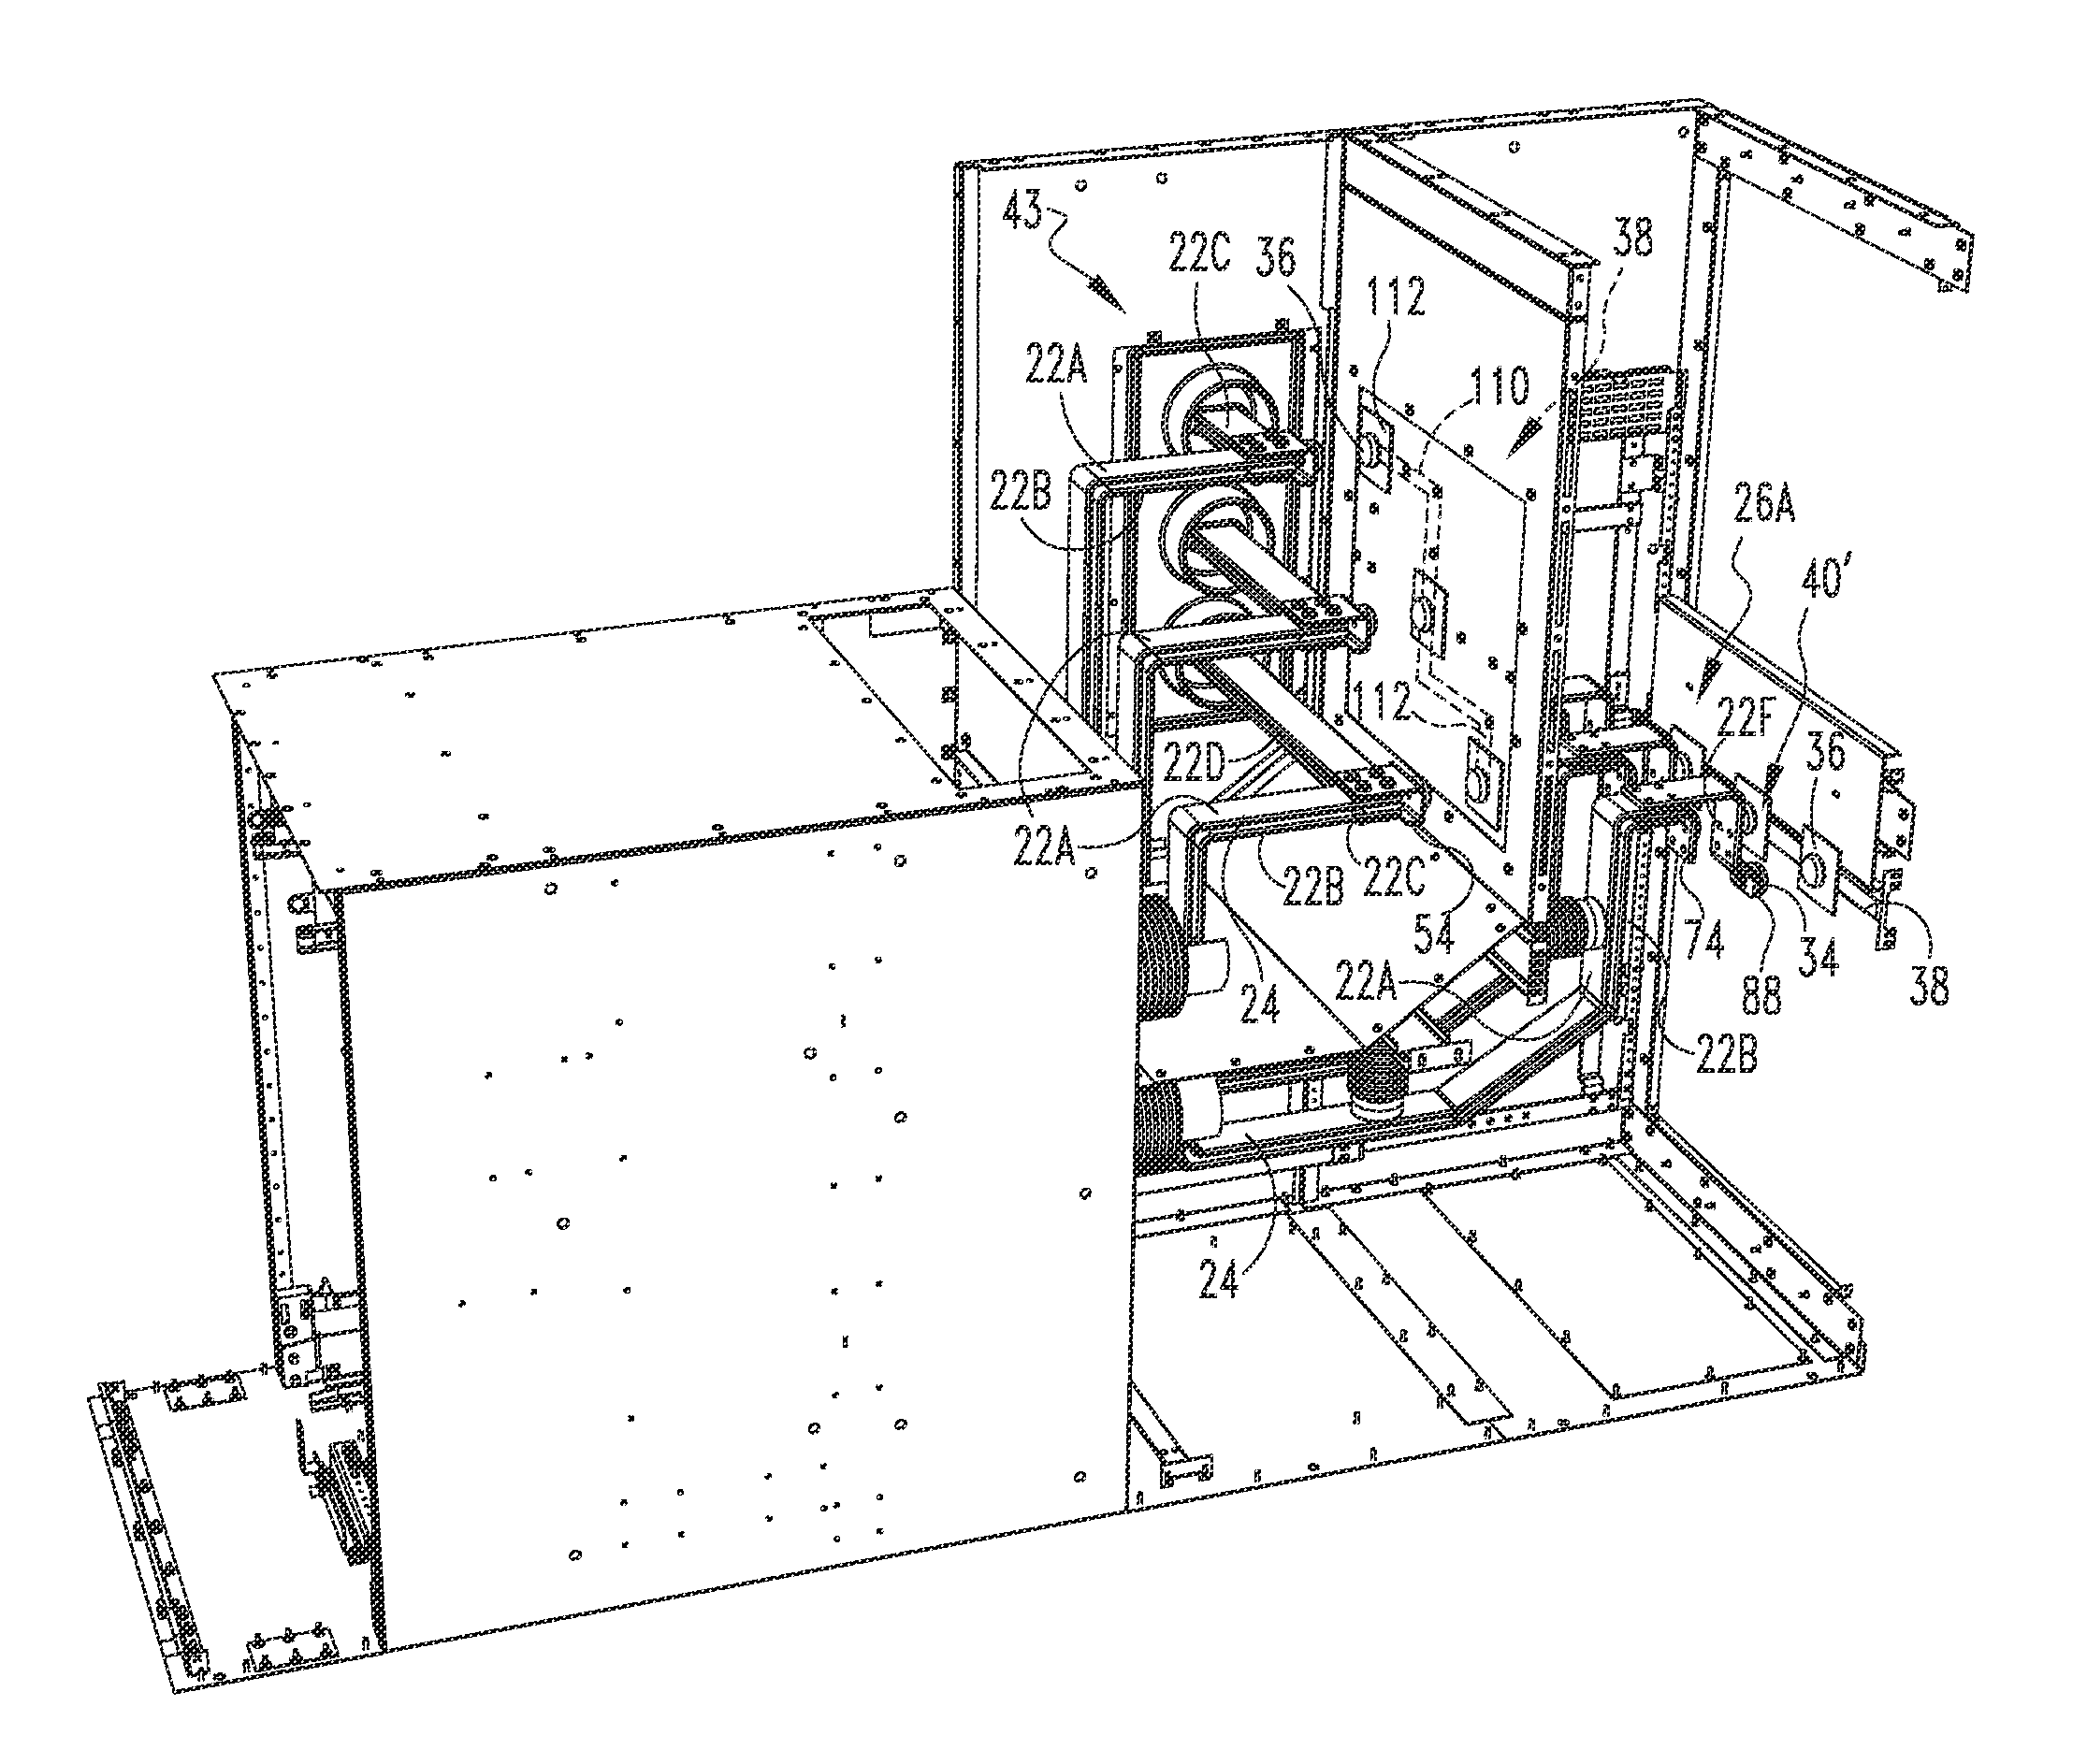 Arc management system for an electrical enclosure assembly